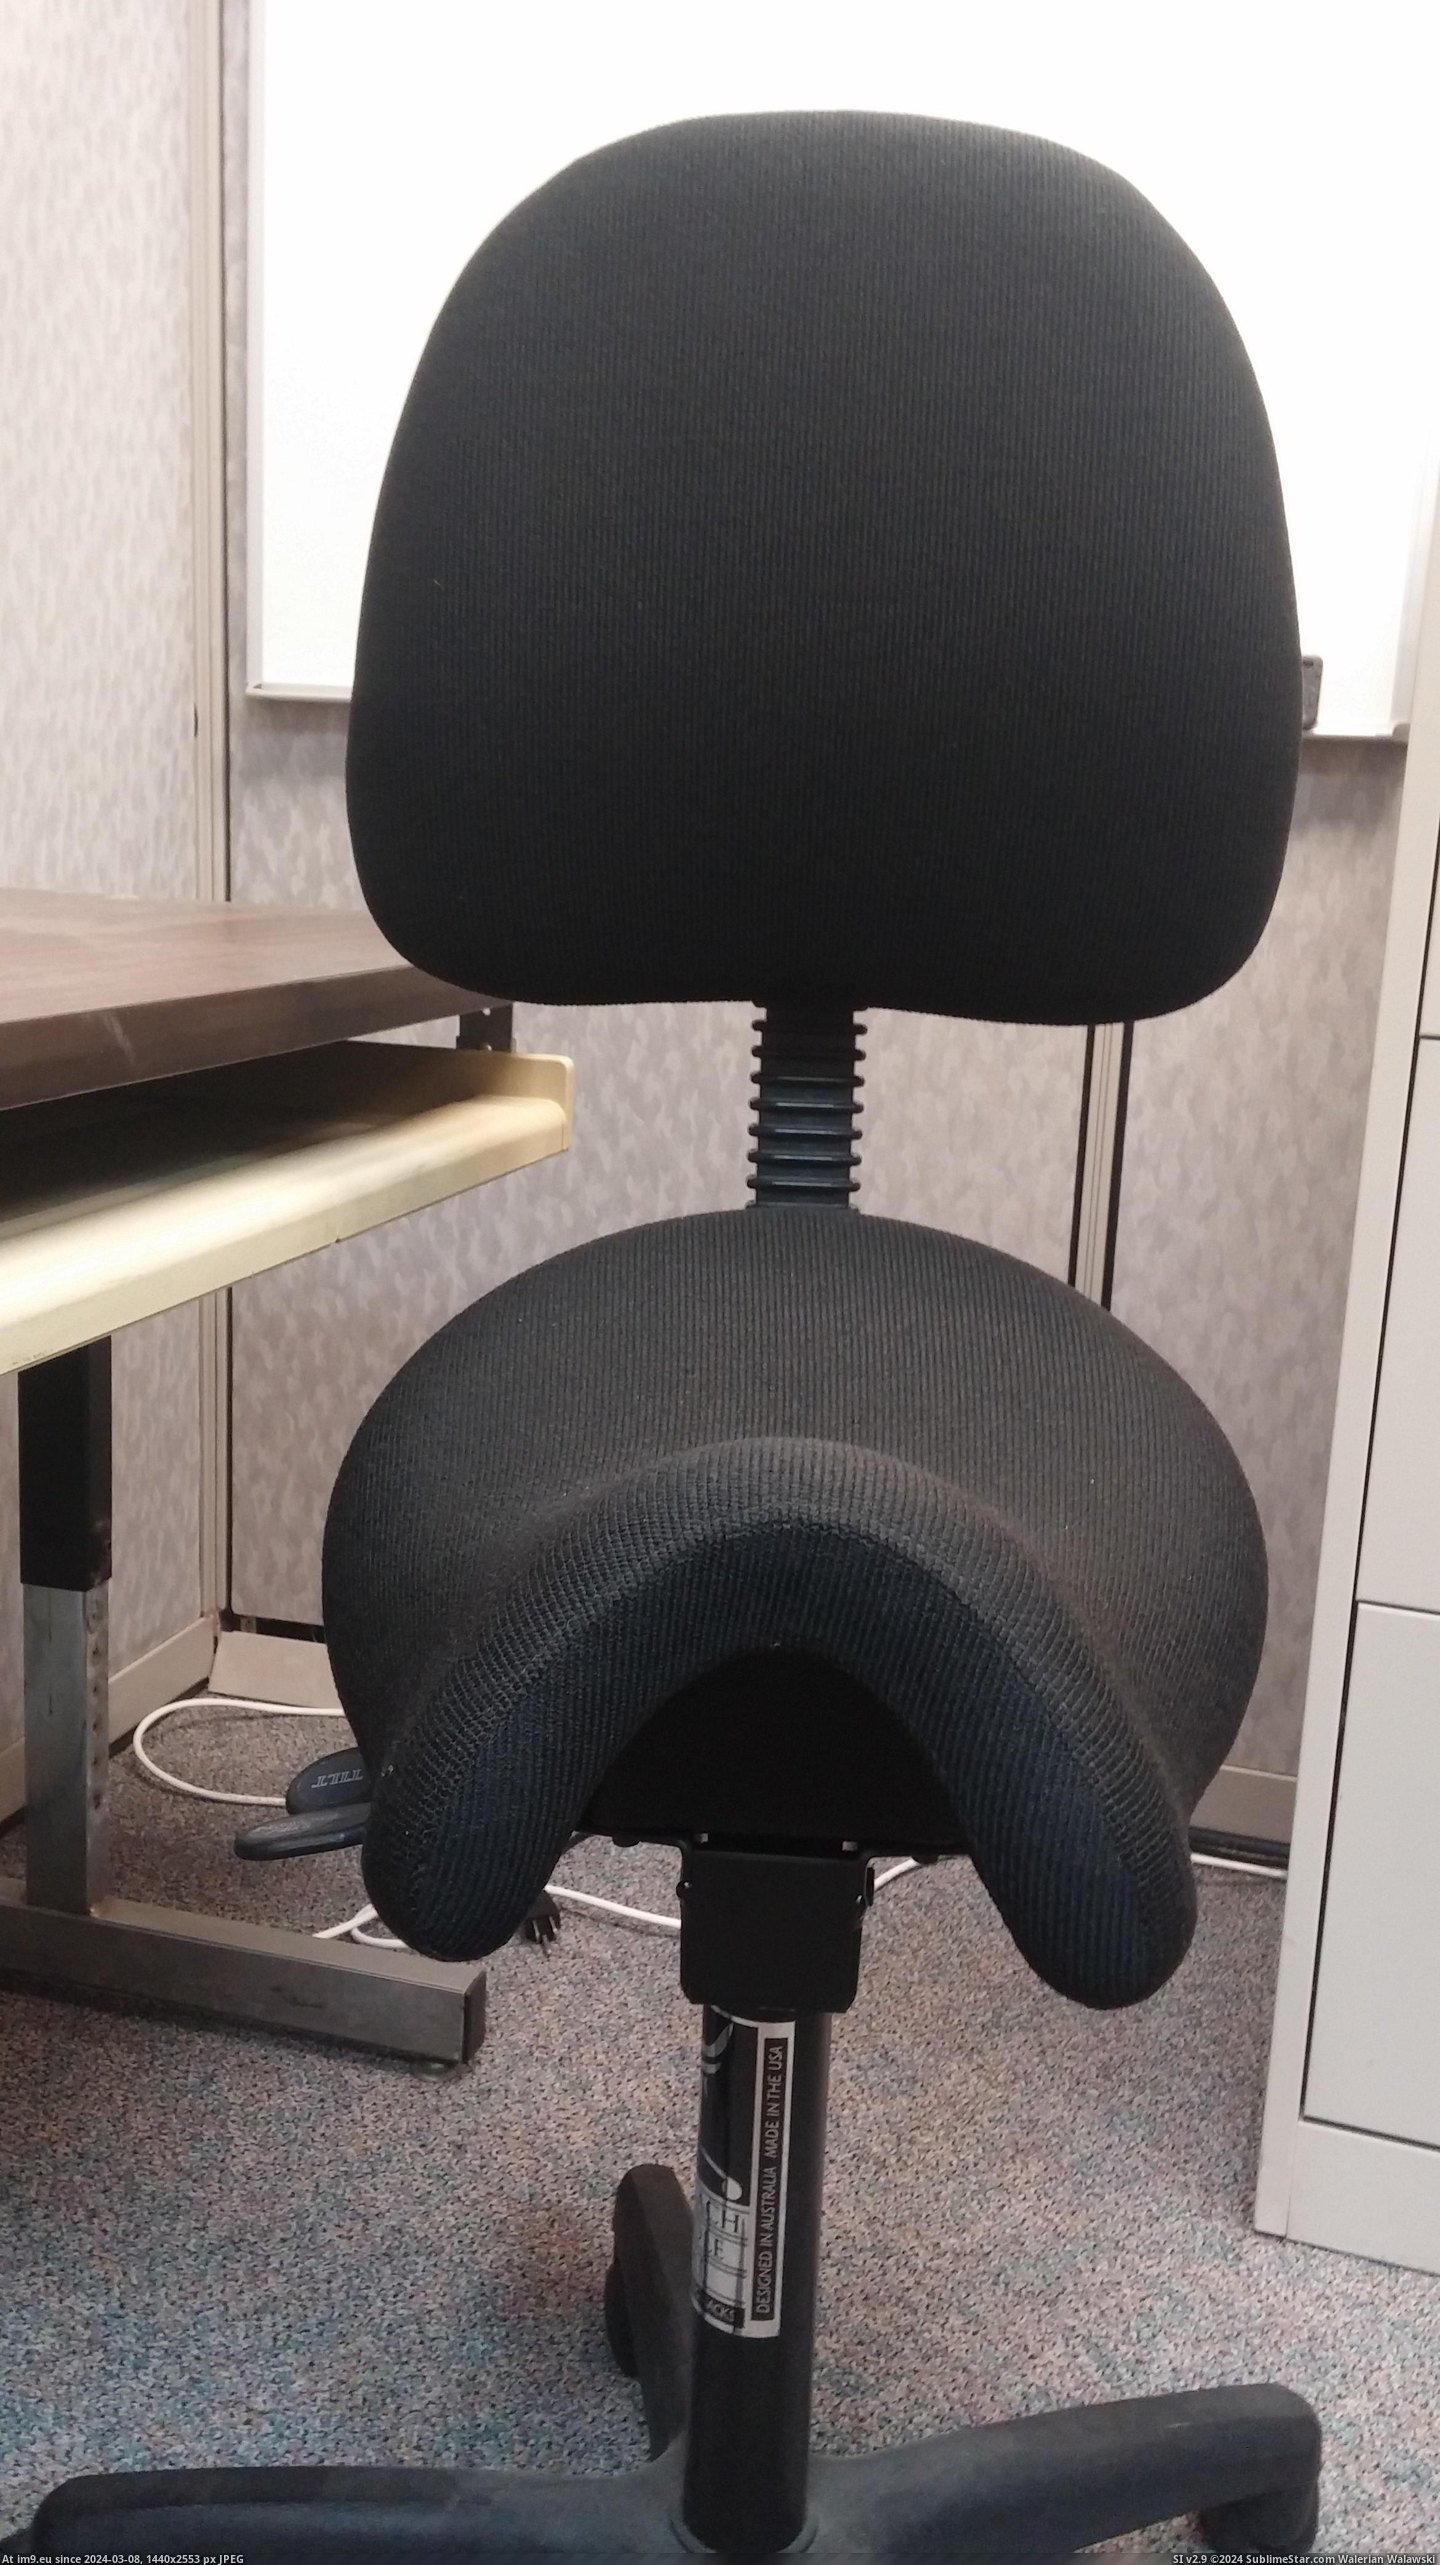 #Work #Office #Saddle #Weird #Chair [Mildlyinteresting] This weird office chair saddle I found at my work. Pic. (Image of album My r/MILDLYINTERESTING favs))